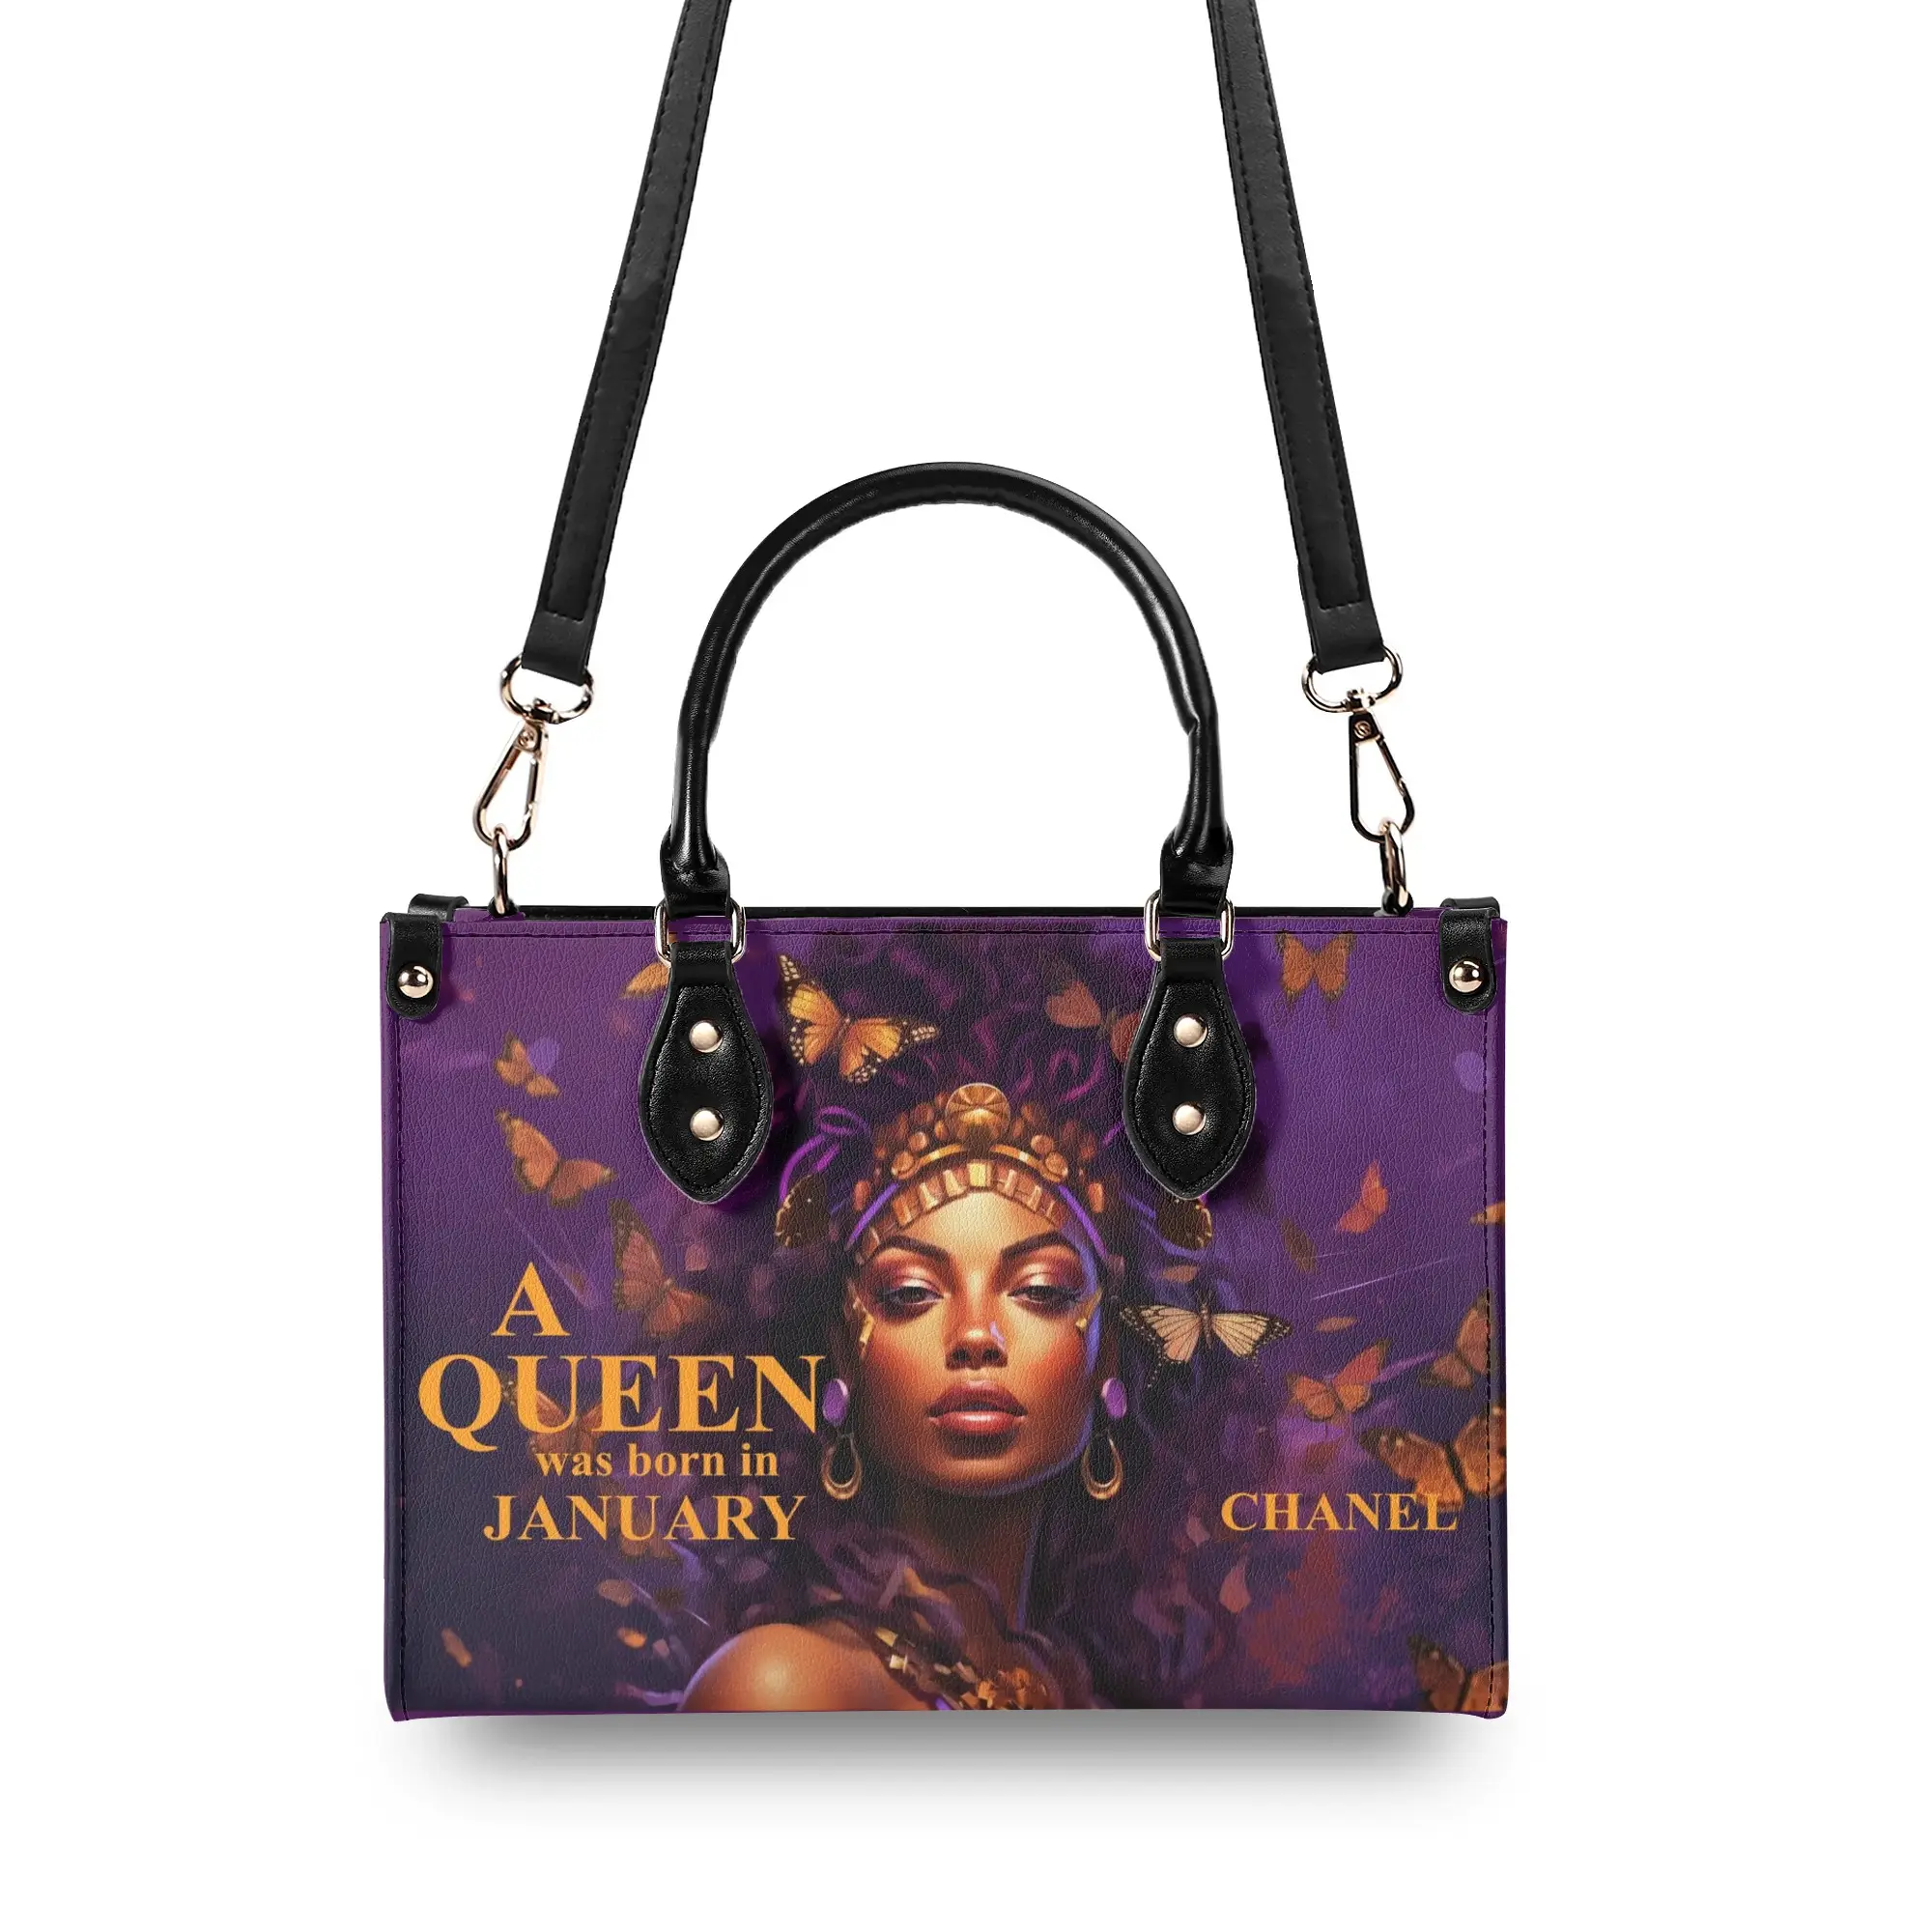 Personalized Leather Handbag Queen